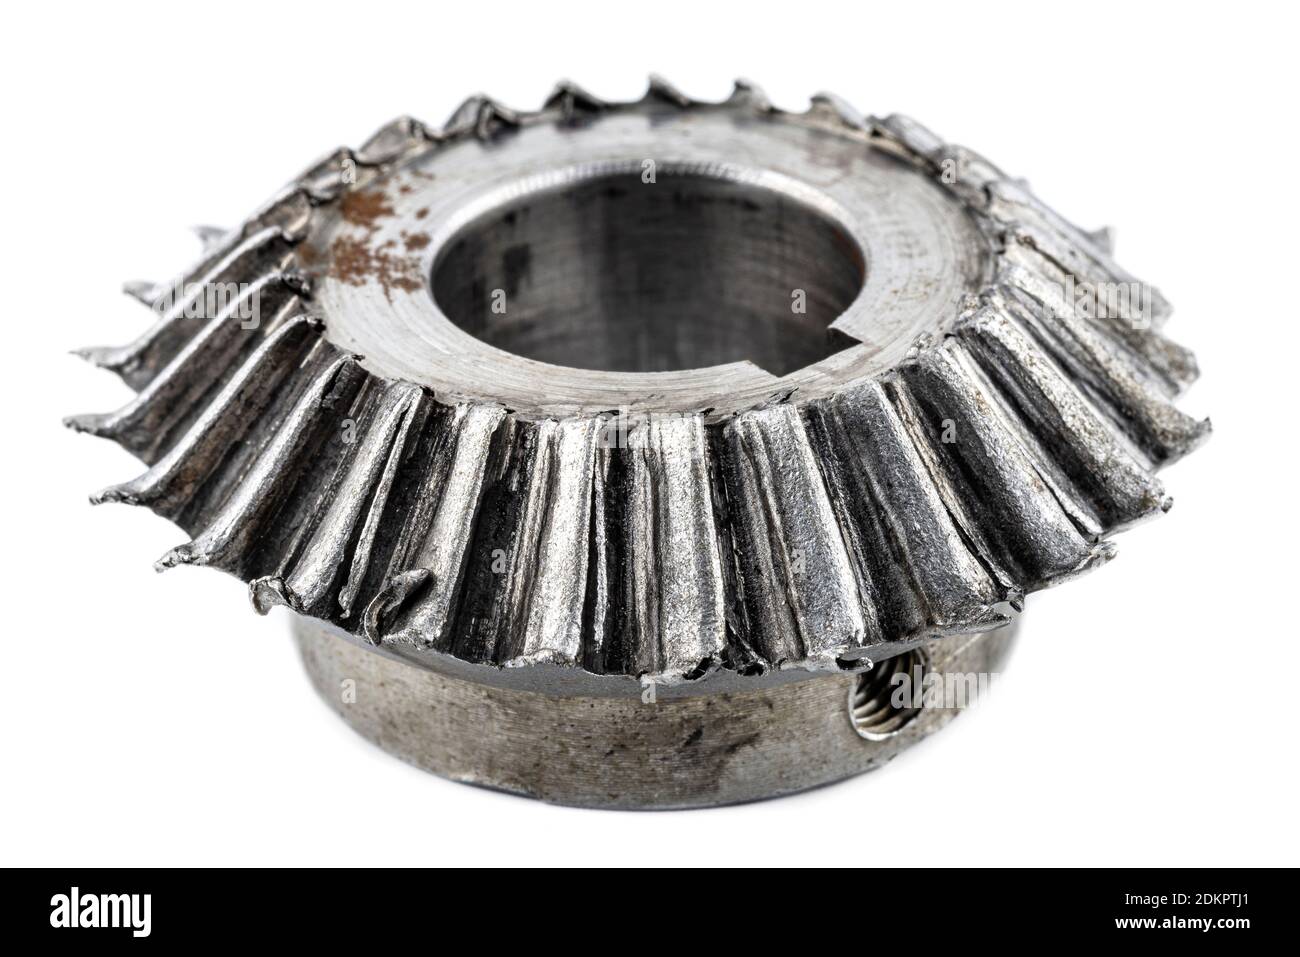 Macro shot of a damaged bevel gear with bevel teeth, isolated on a white background. Stock Photo